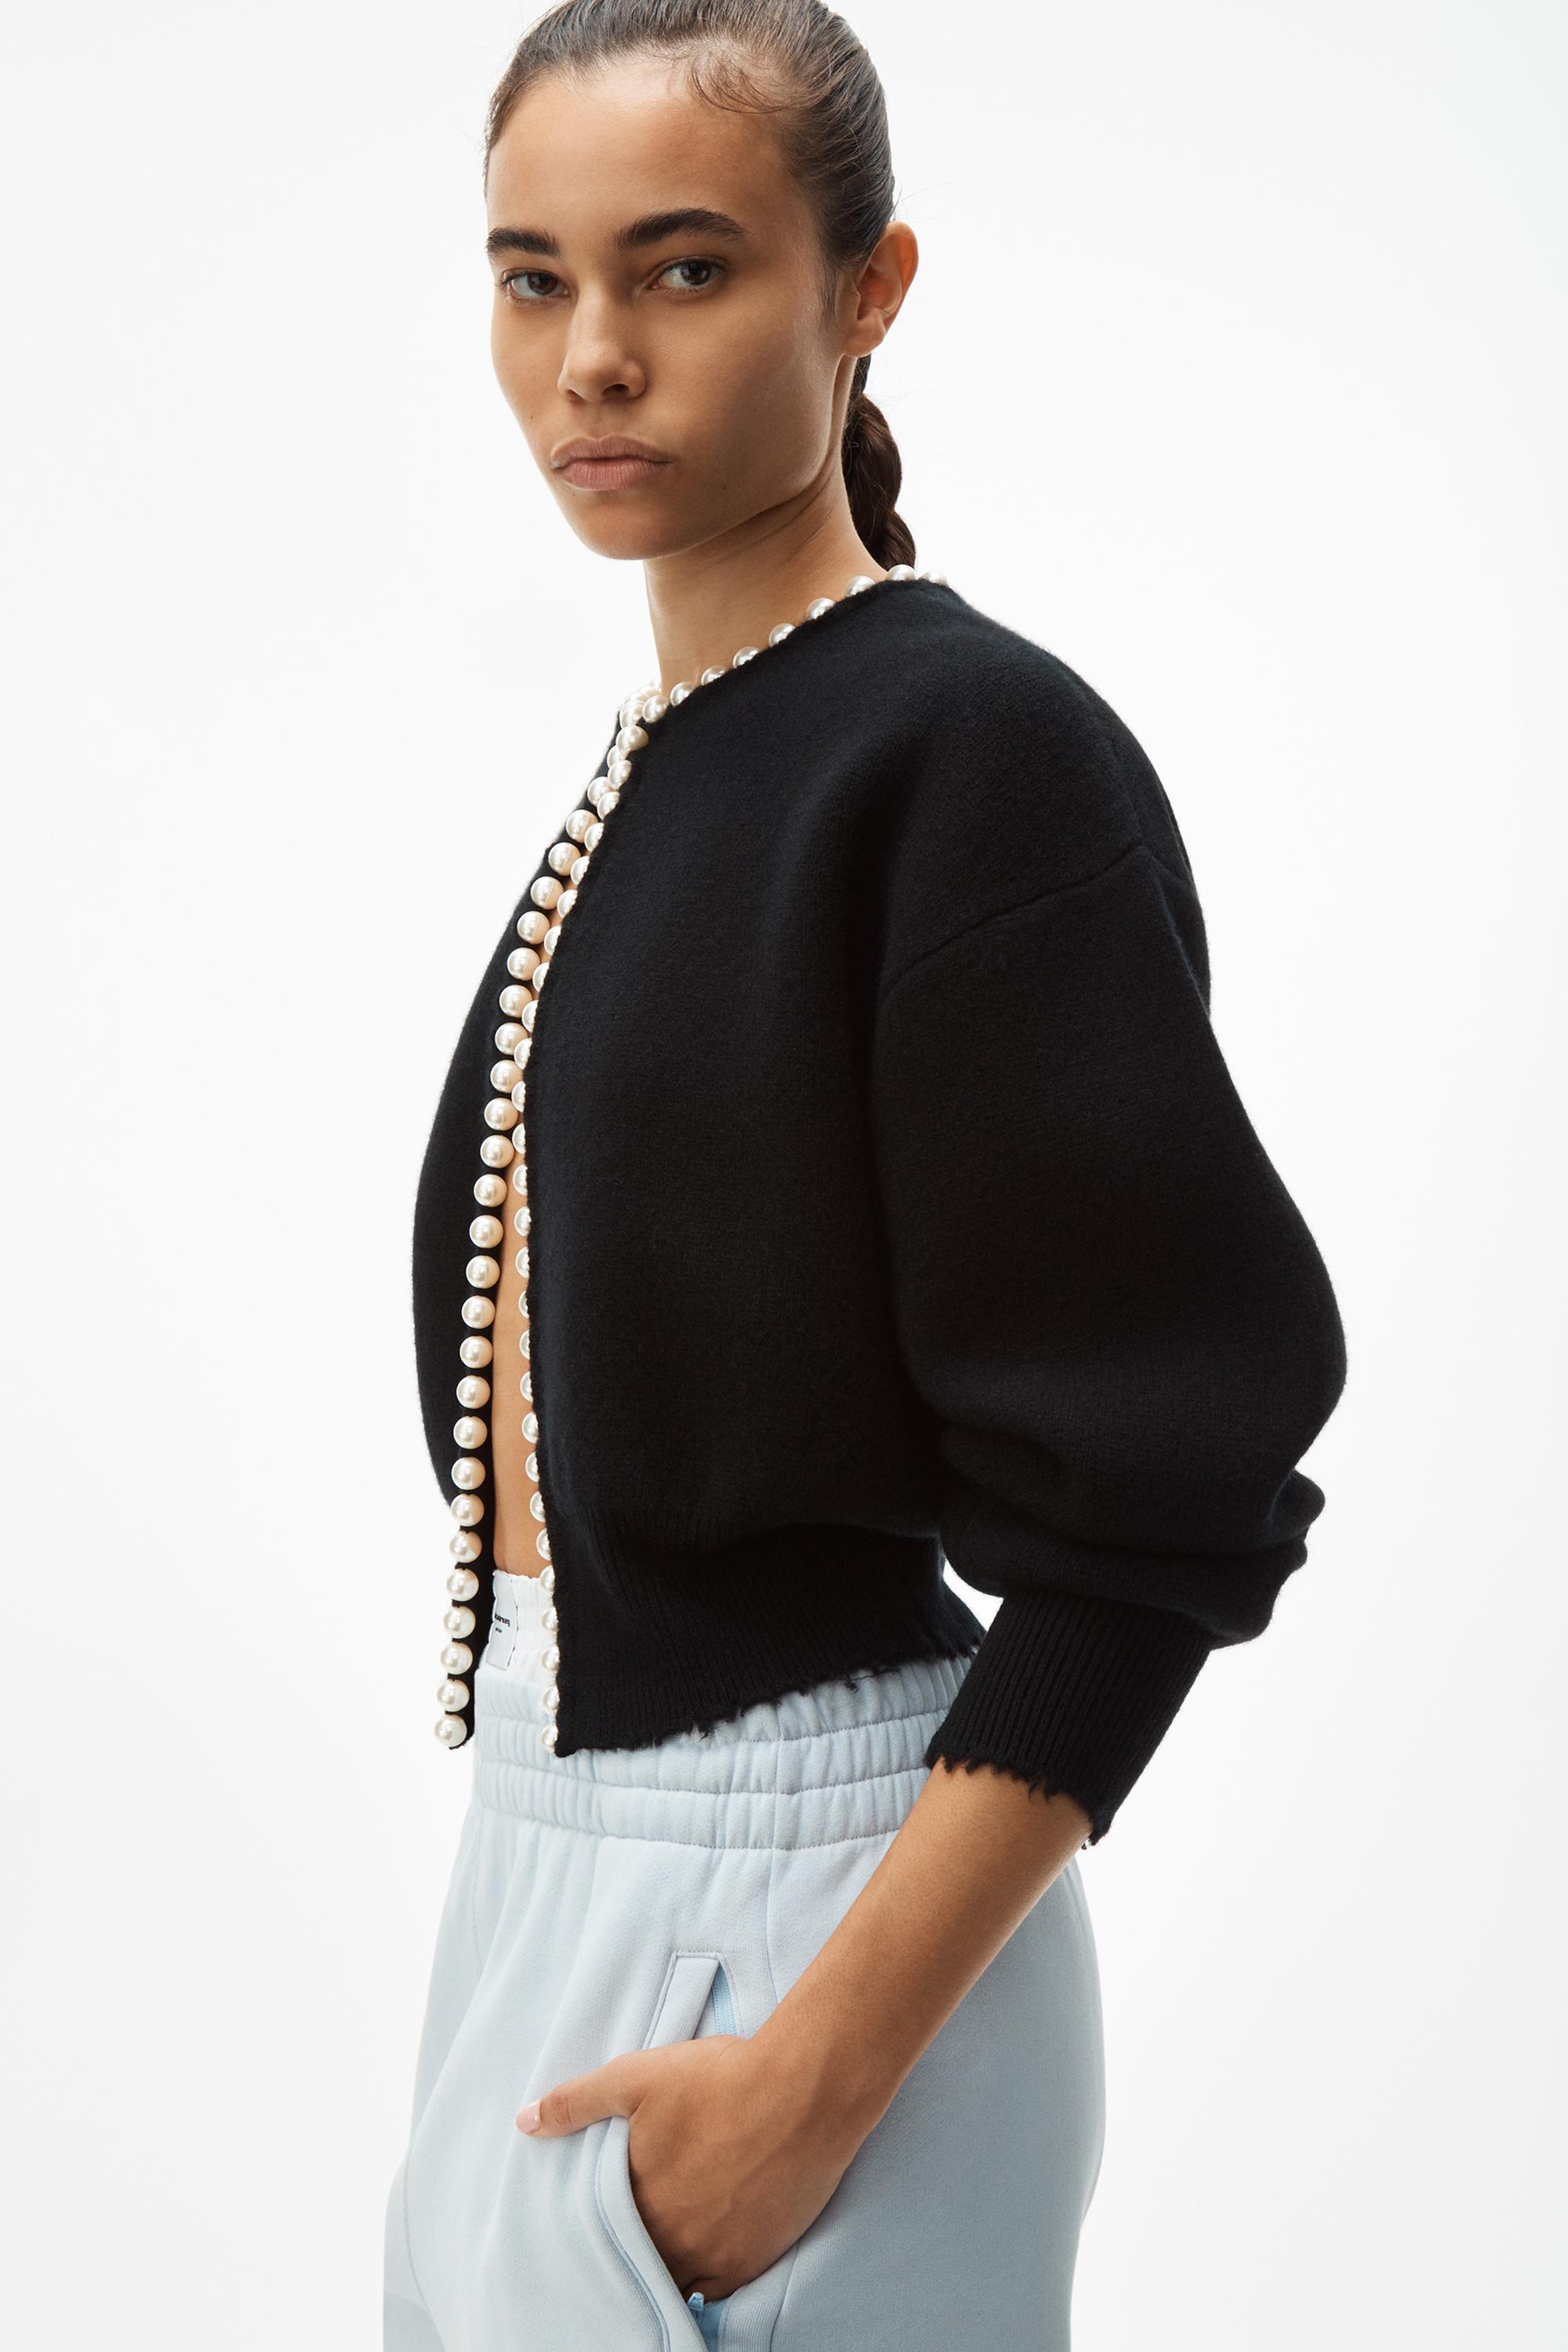 Alexander Wang Synthetic Pearl Placket Cardigan in Black - Lyst